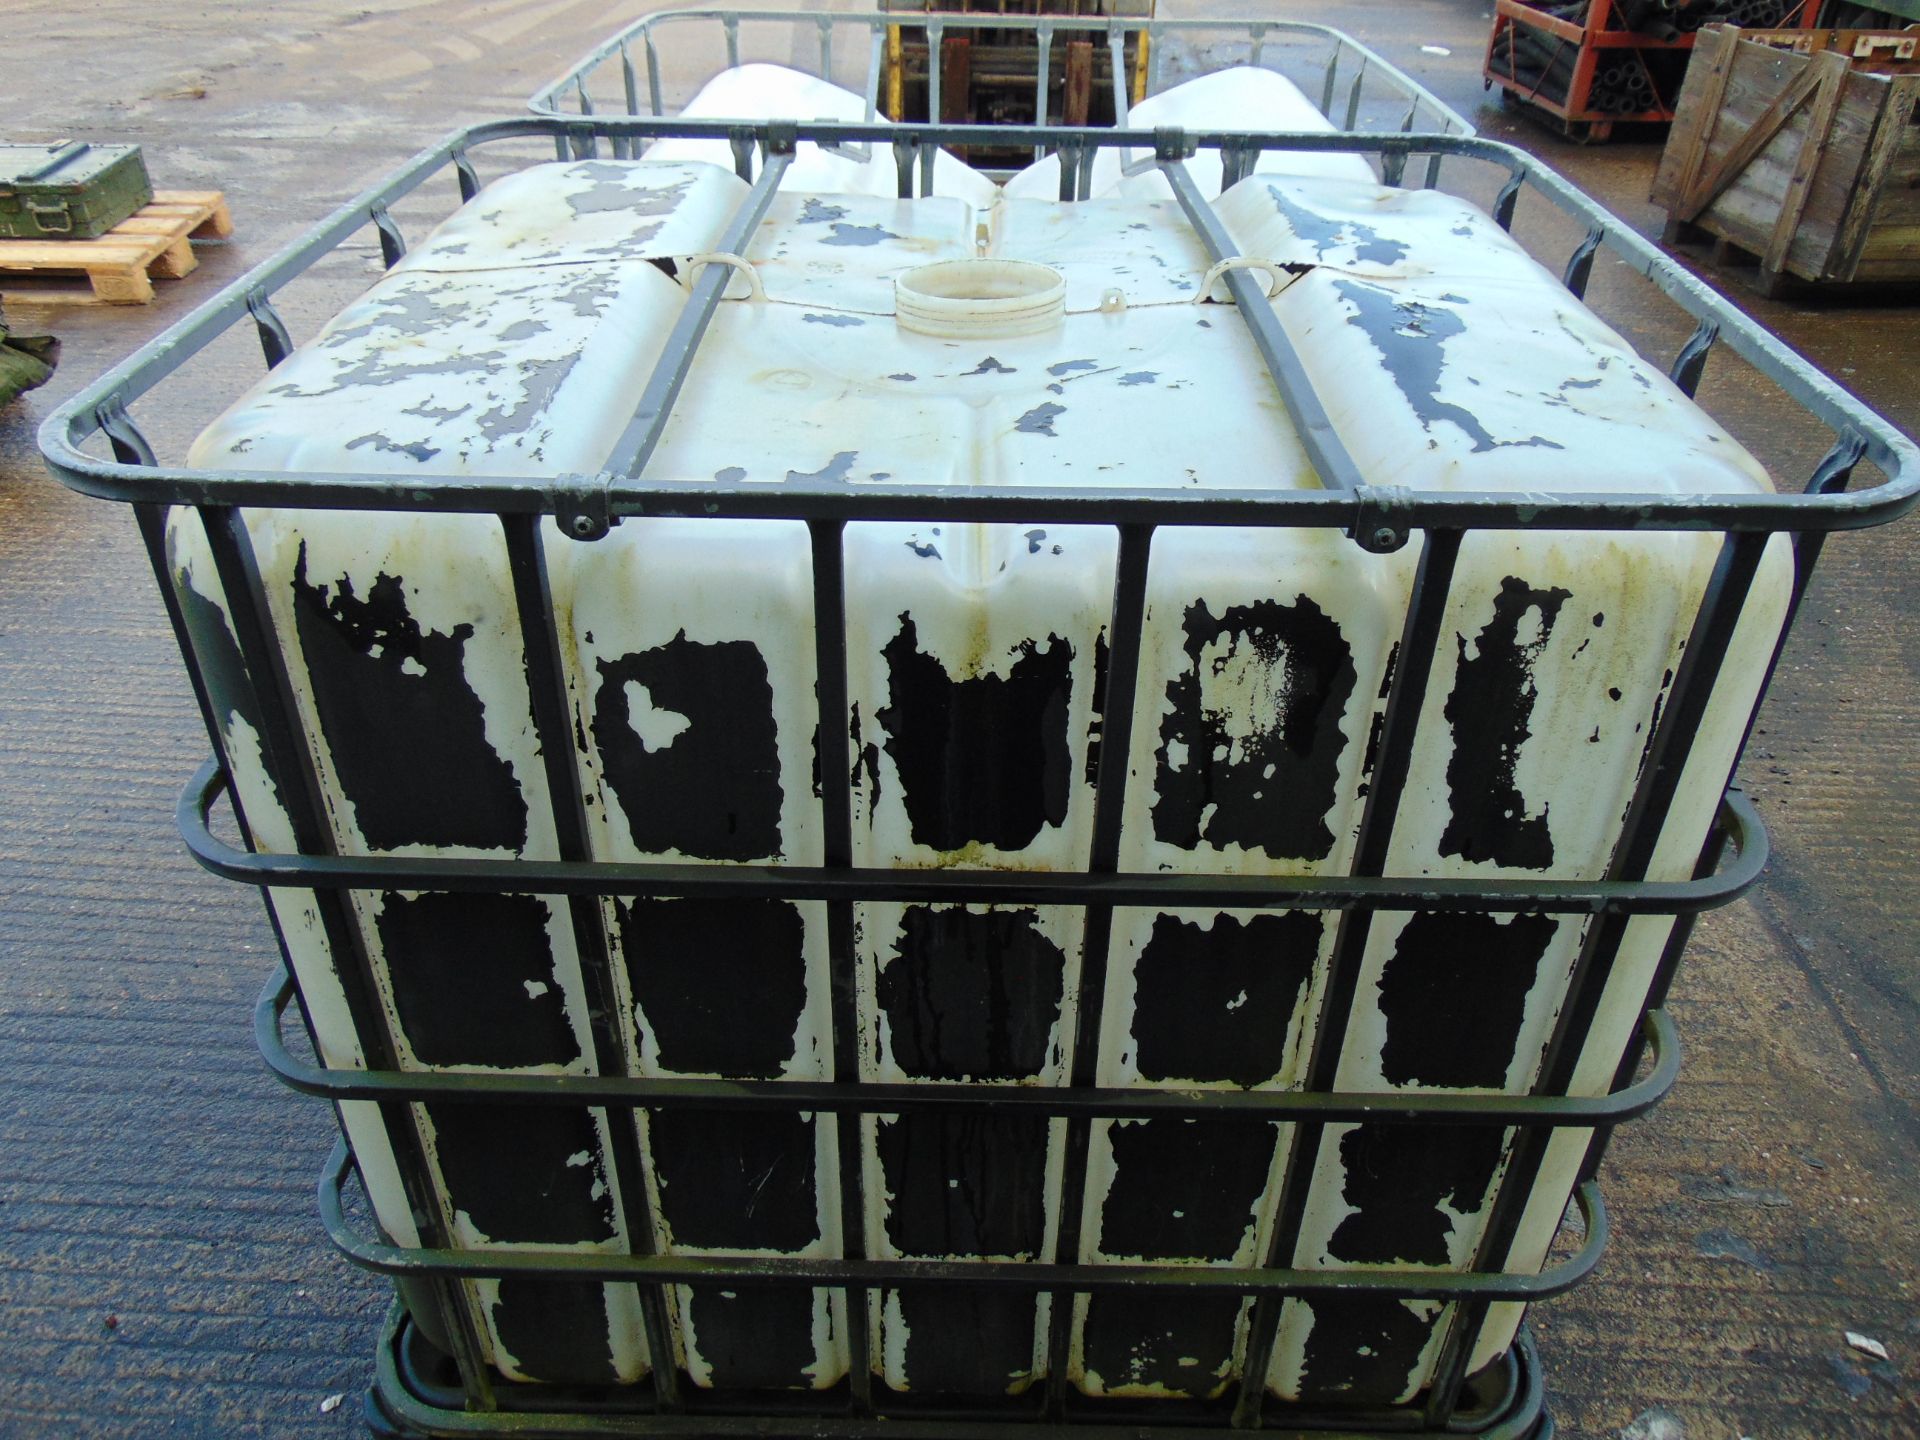 2 x Used 1000 Litre IBC Container / Caged Water Tank - Image 4 of 4